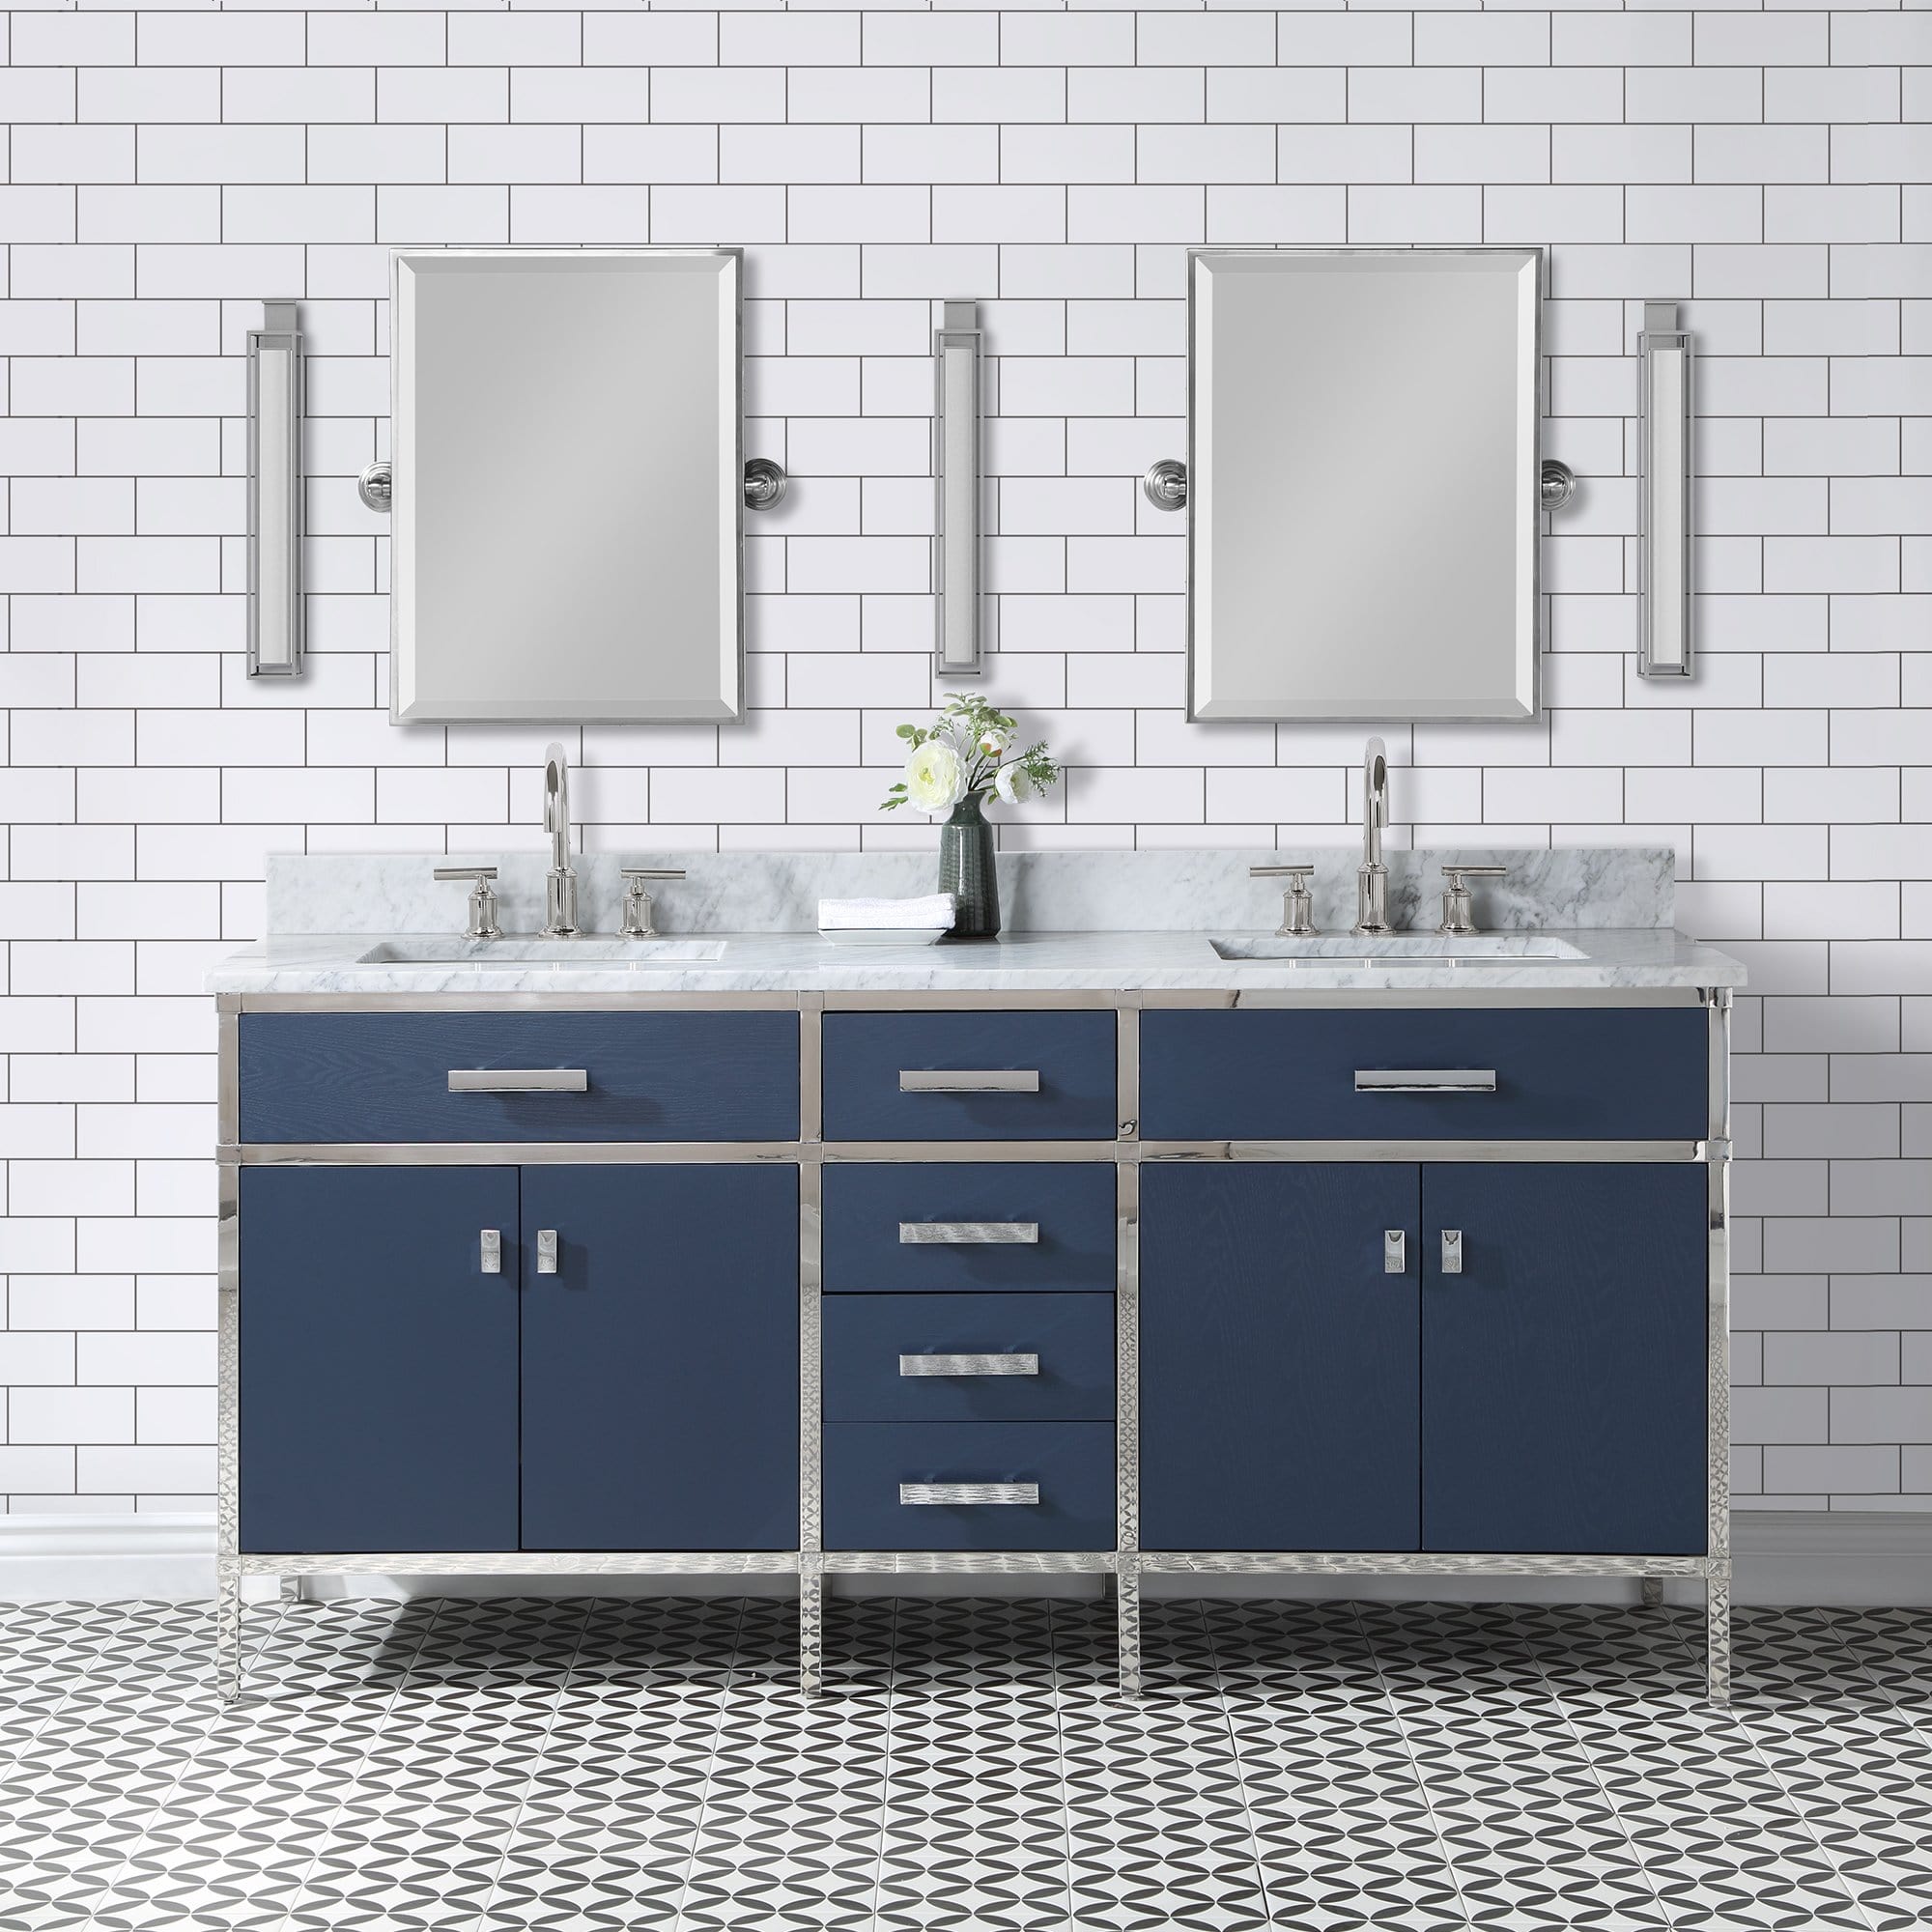 Water Creation Marquis 72 In. Double Sink Carrara White Marble Countertop Vanity in Monarch Blue with Mirrors - Molaix732030765979Bathroom vanityMQ72CW01MB-E18000000